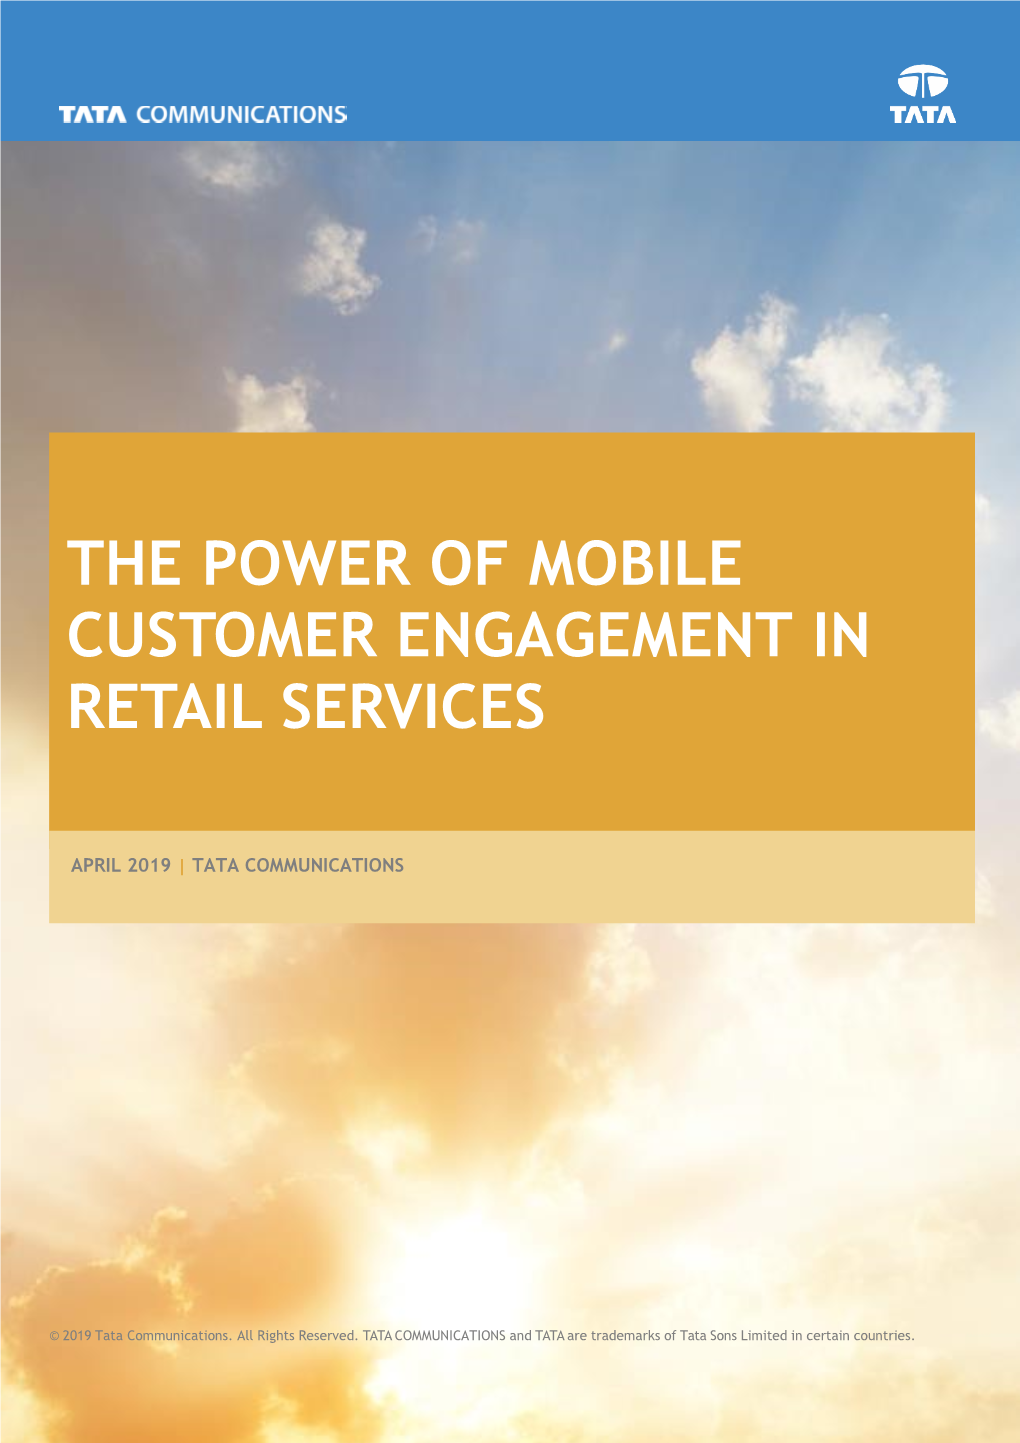 The Power of Mobile Customer Engagement In